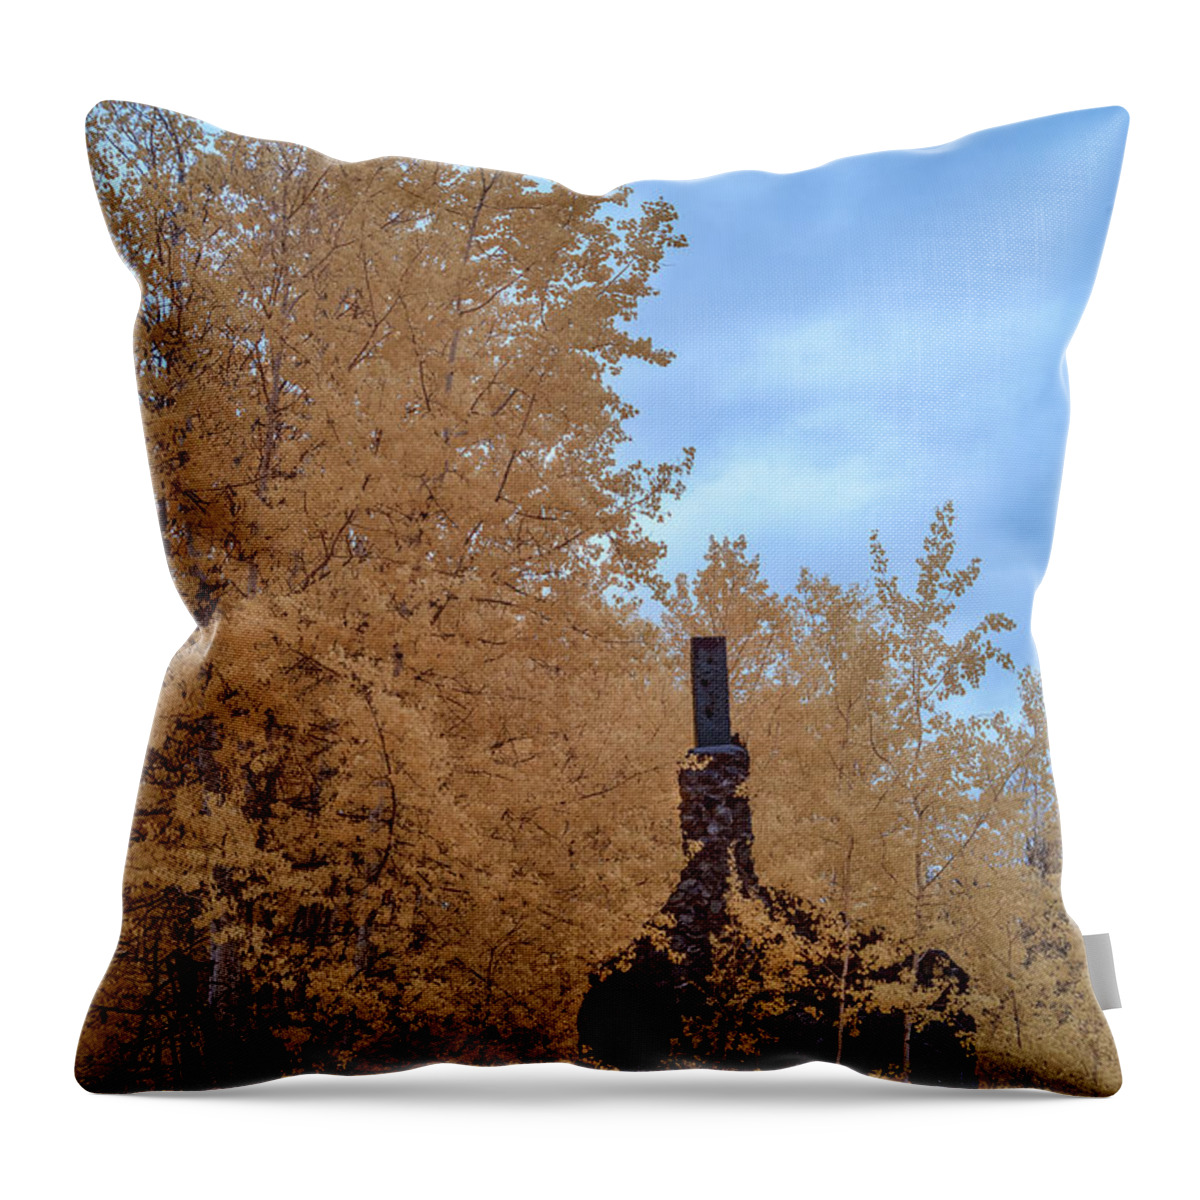 Ruins In Infrared Throw Pillow featuring the photograph Ruins In Infrared by Paul Freidlund